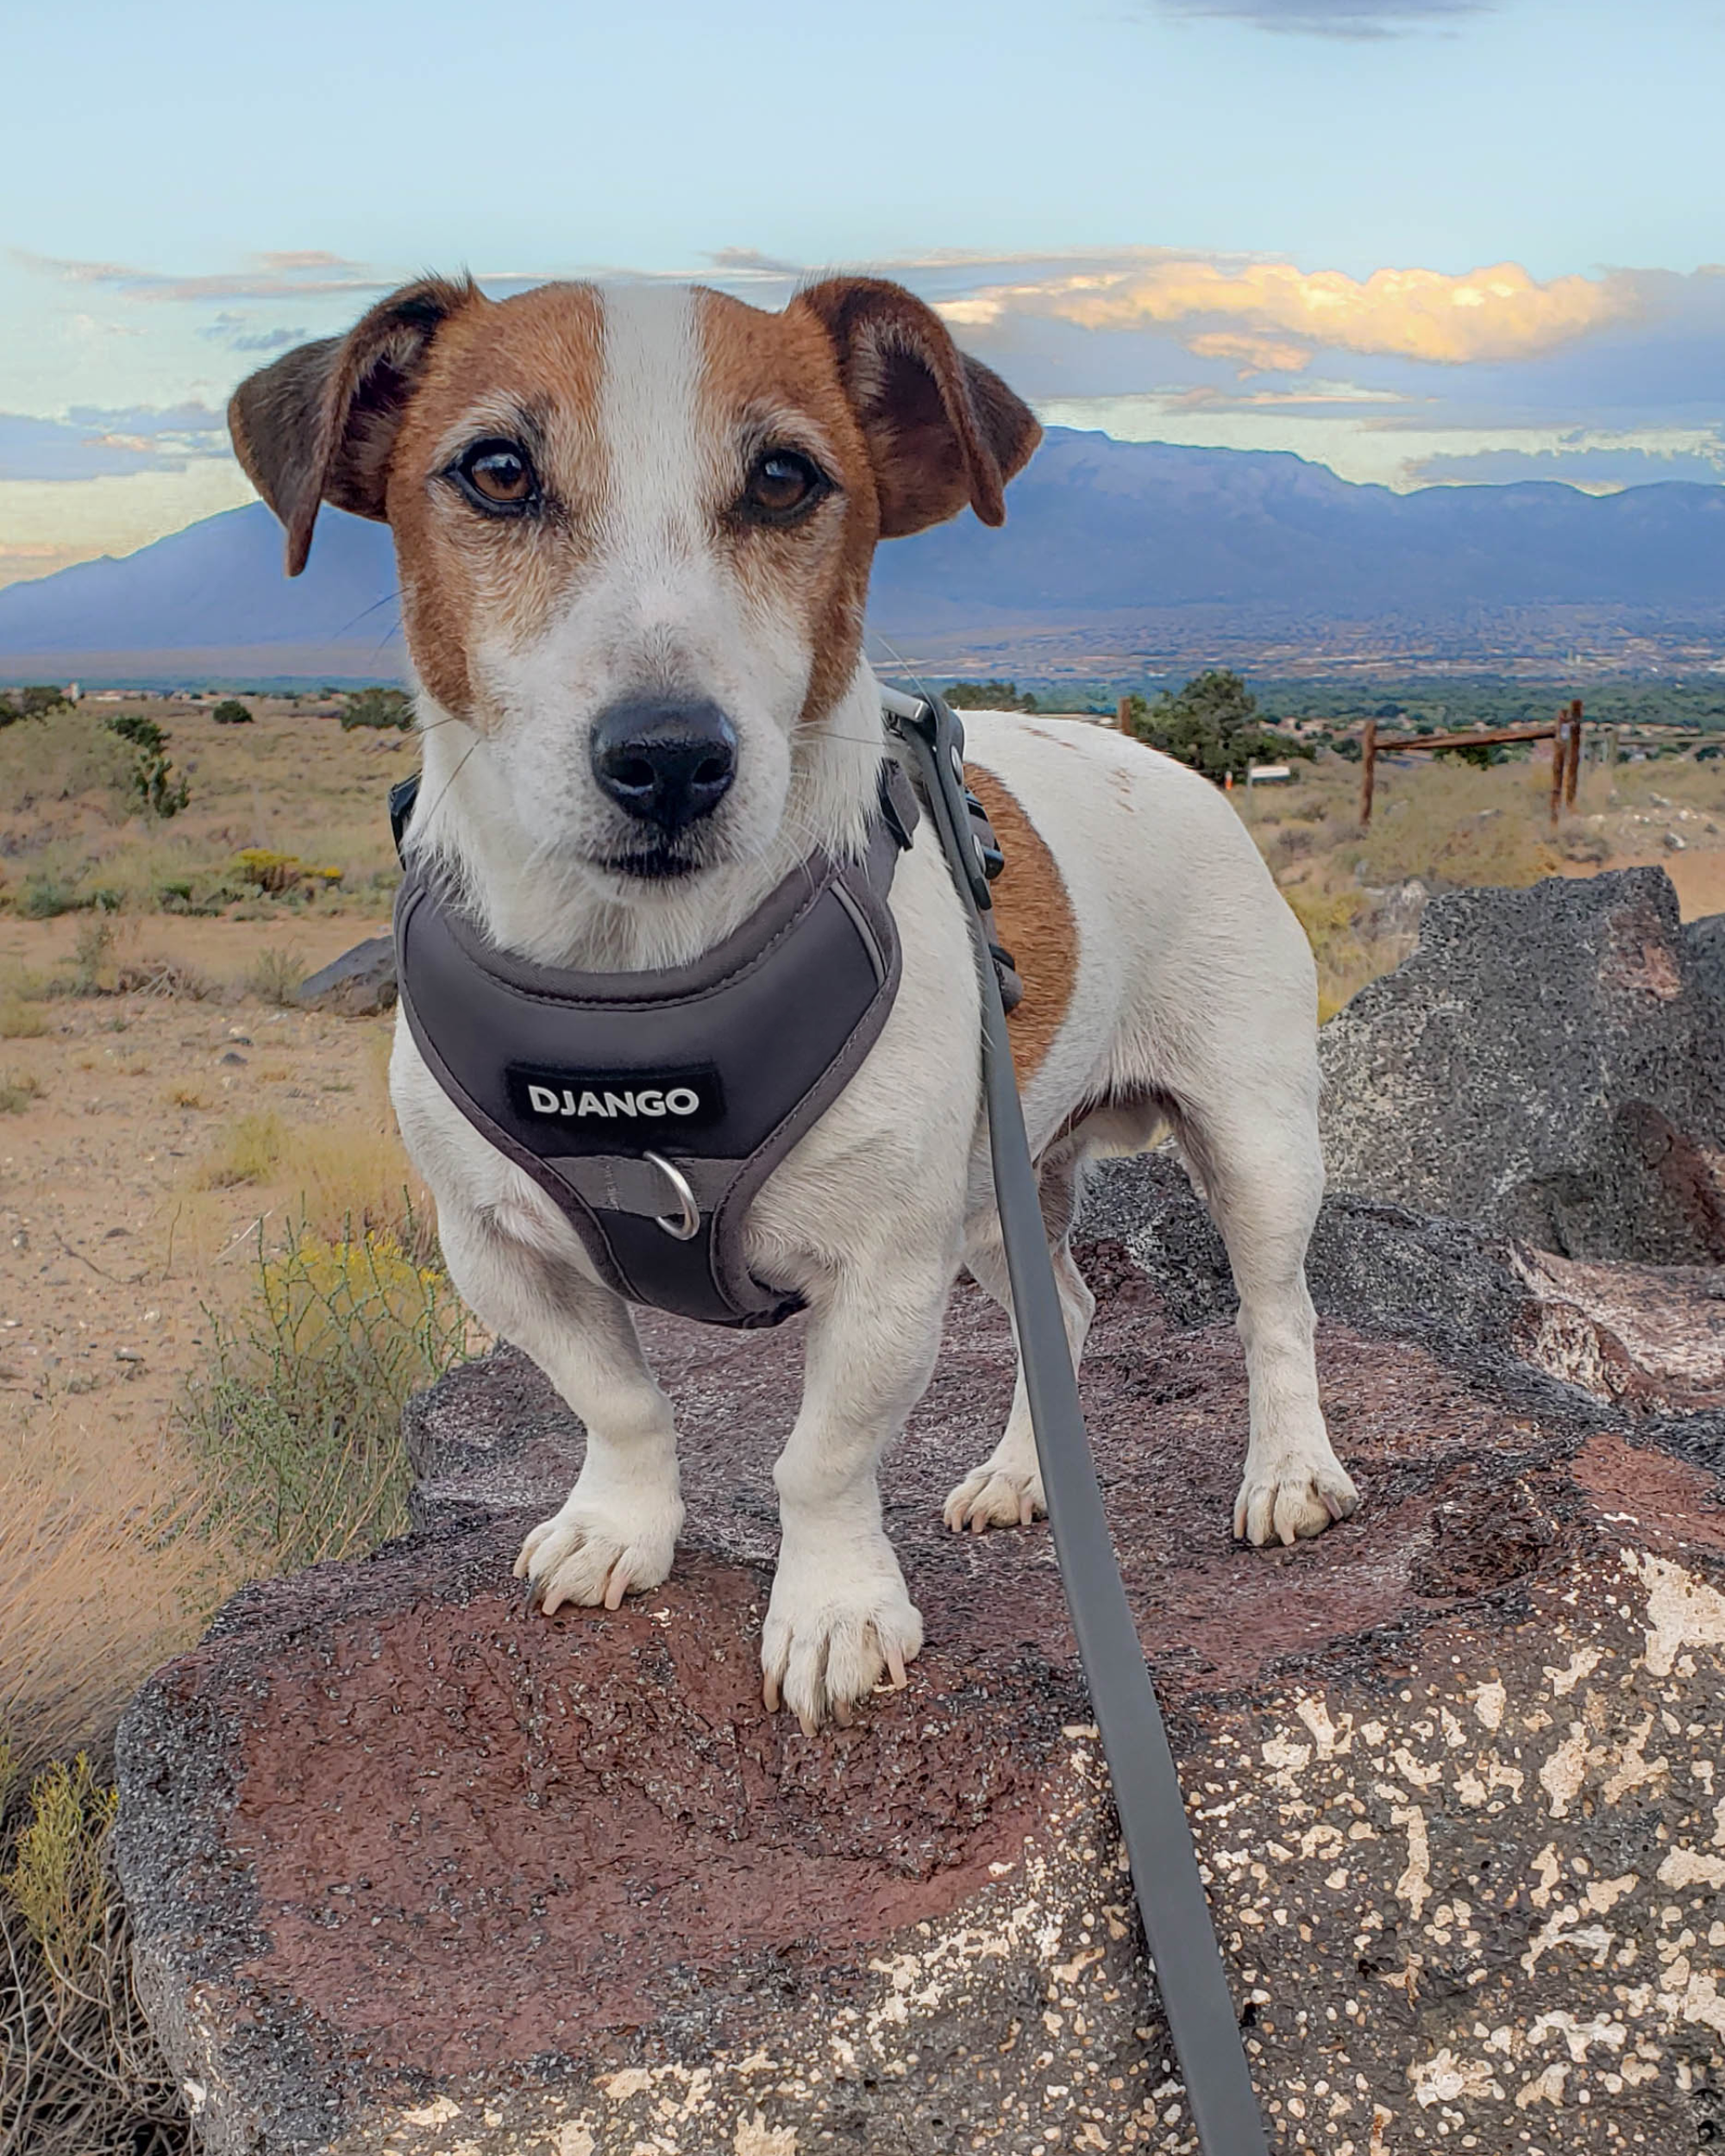 Gunner is adventuring by Black Volcano, New Mexico in his matching DJANGO Tahoe No Pull Dog Harness and Waterproof Dog Leash set. Gunner is an outdoor-loving Jack Russell terrier and wears a size medium DJANGO dog harness. - djangobrand.com